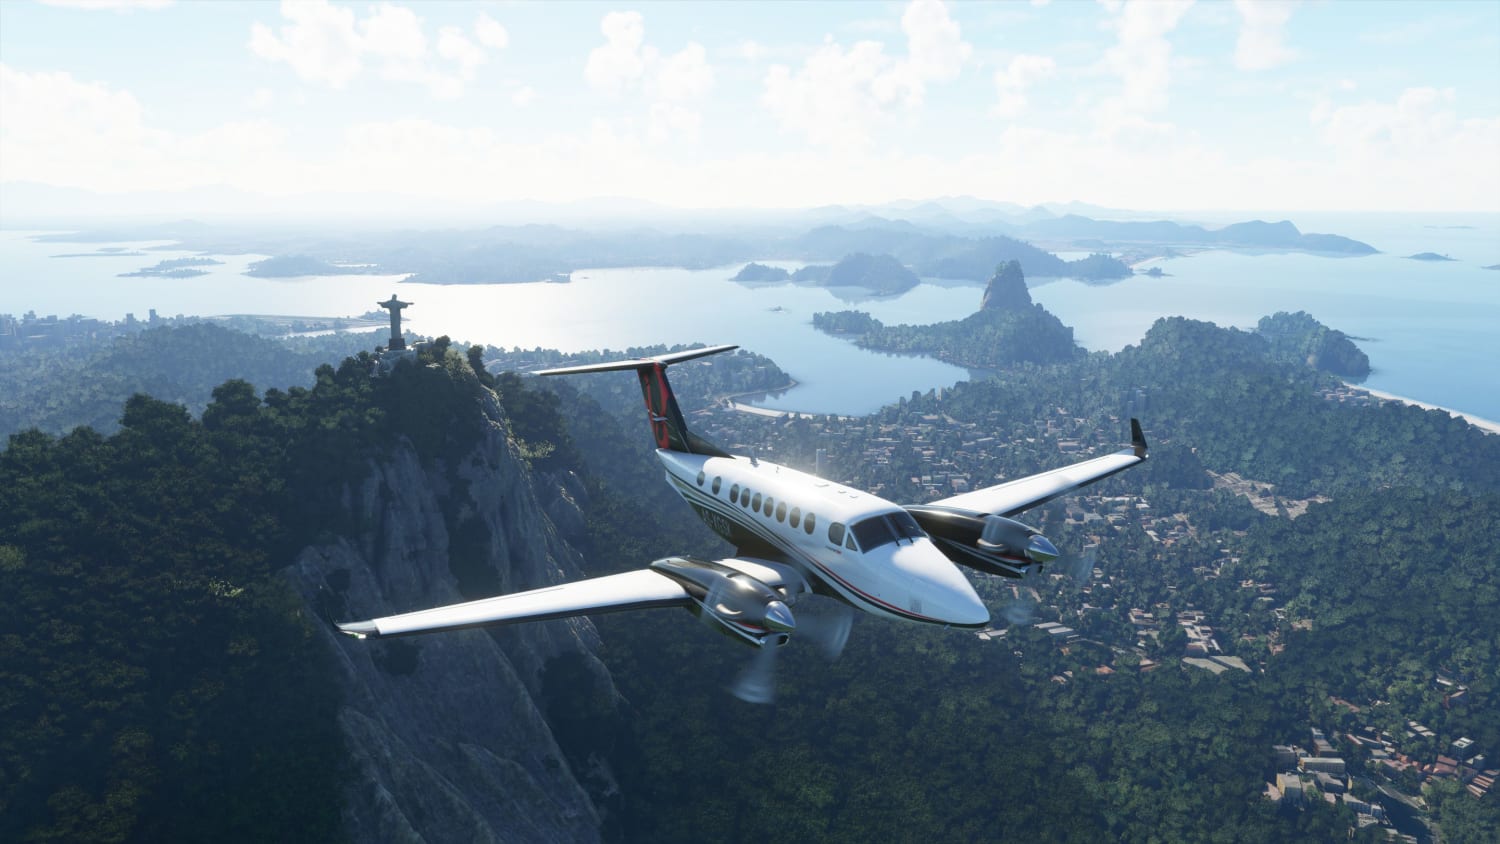 Flight Simulator 2020 provides a worldwide playset for architects and urbanists